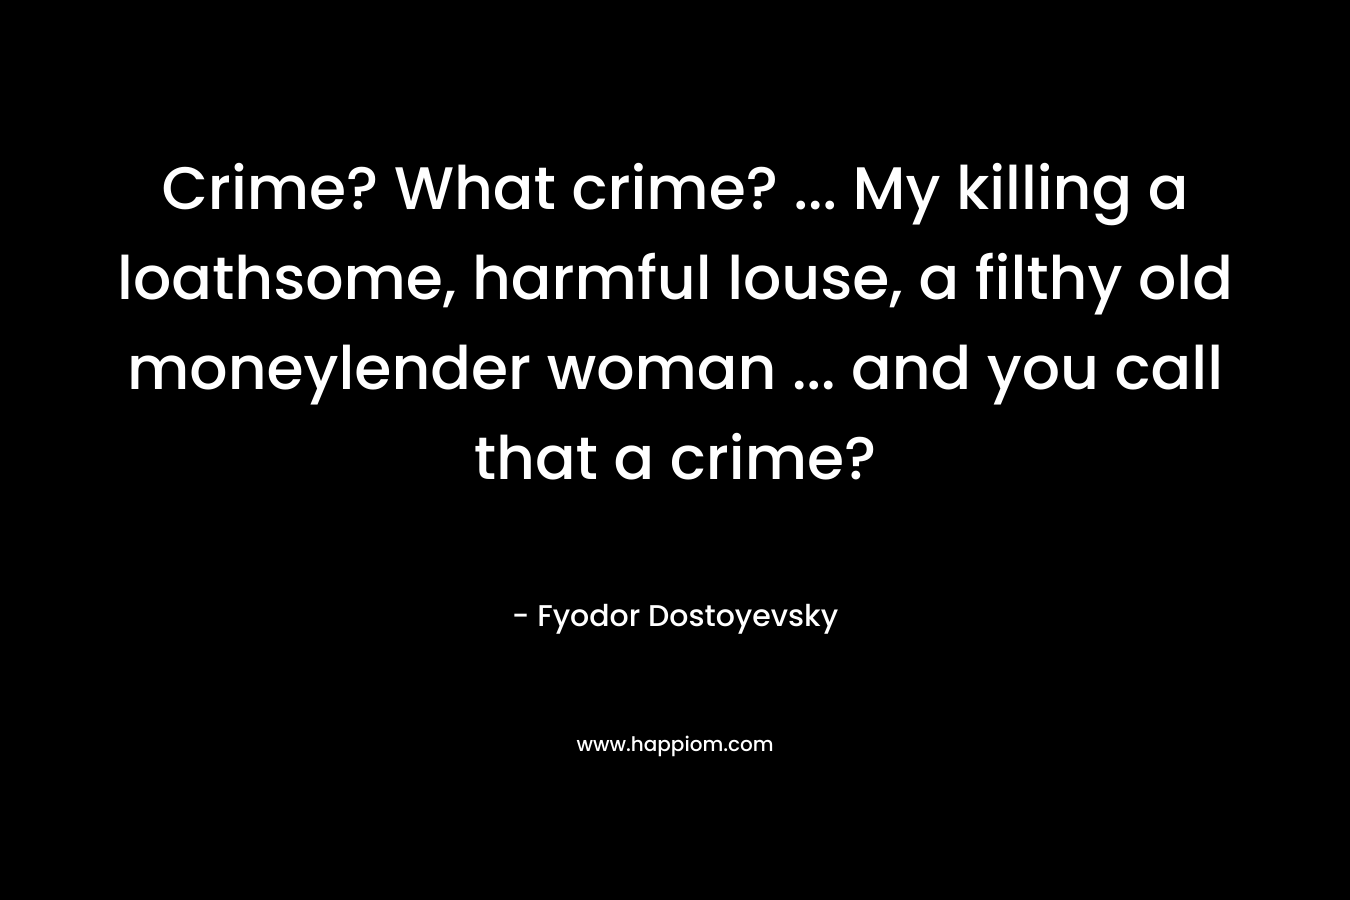 Crime? What crime? … My killing a loathsome, harmful louse, a filthy old moneylender woman … and you call that a crime? – Fyodor Dostoyevsky